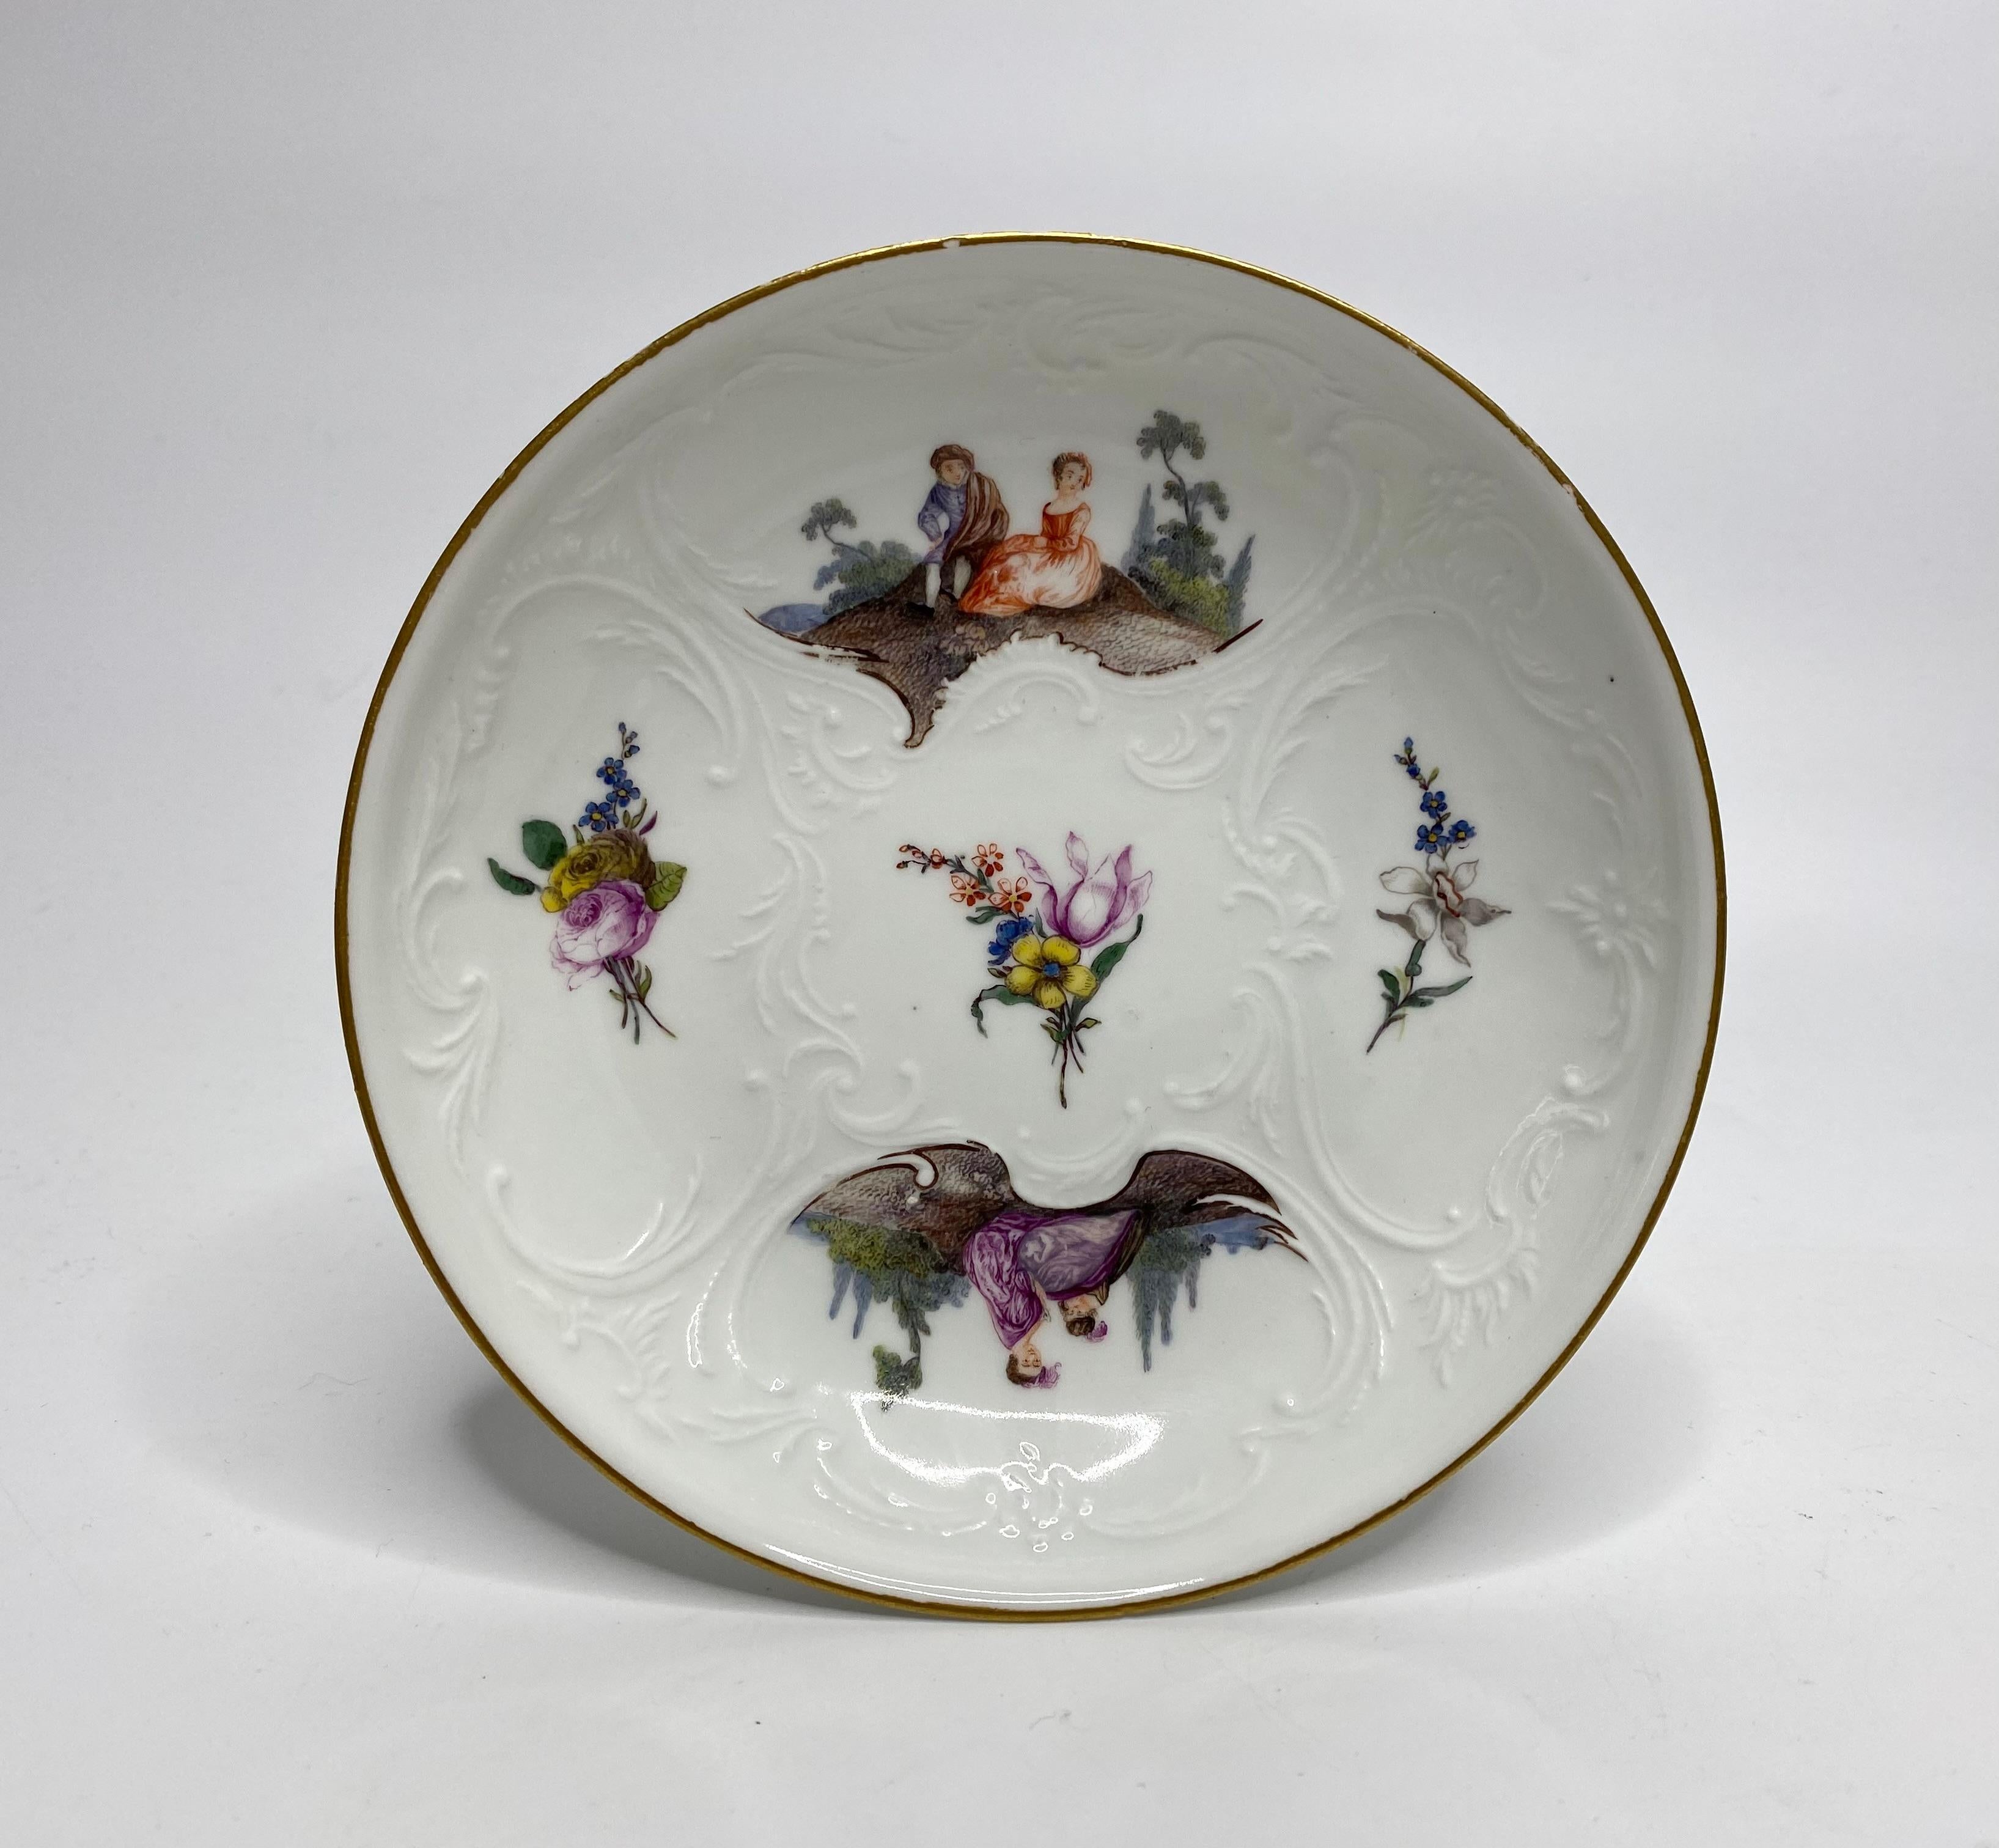 Meissen porcelain cup and saucer, c. 1740. Both the cup and the saucer, finely moulded in blind relief, with scrollwork panels. The panels painted in enamels, with scenes of courting couples in 18th Century attire, in the countryside; one couple